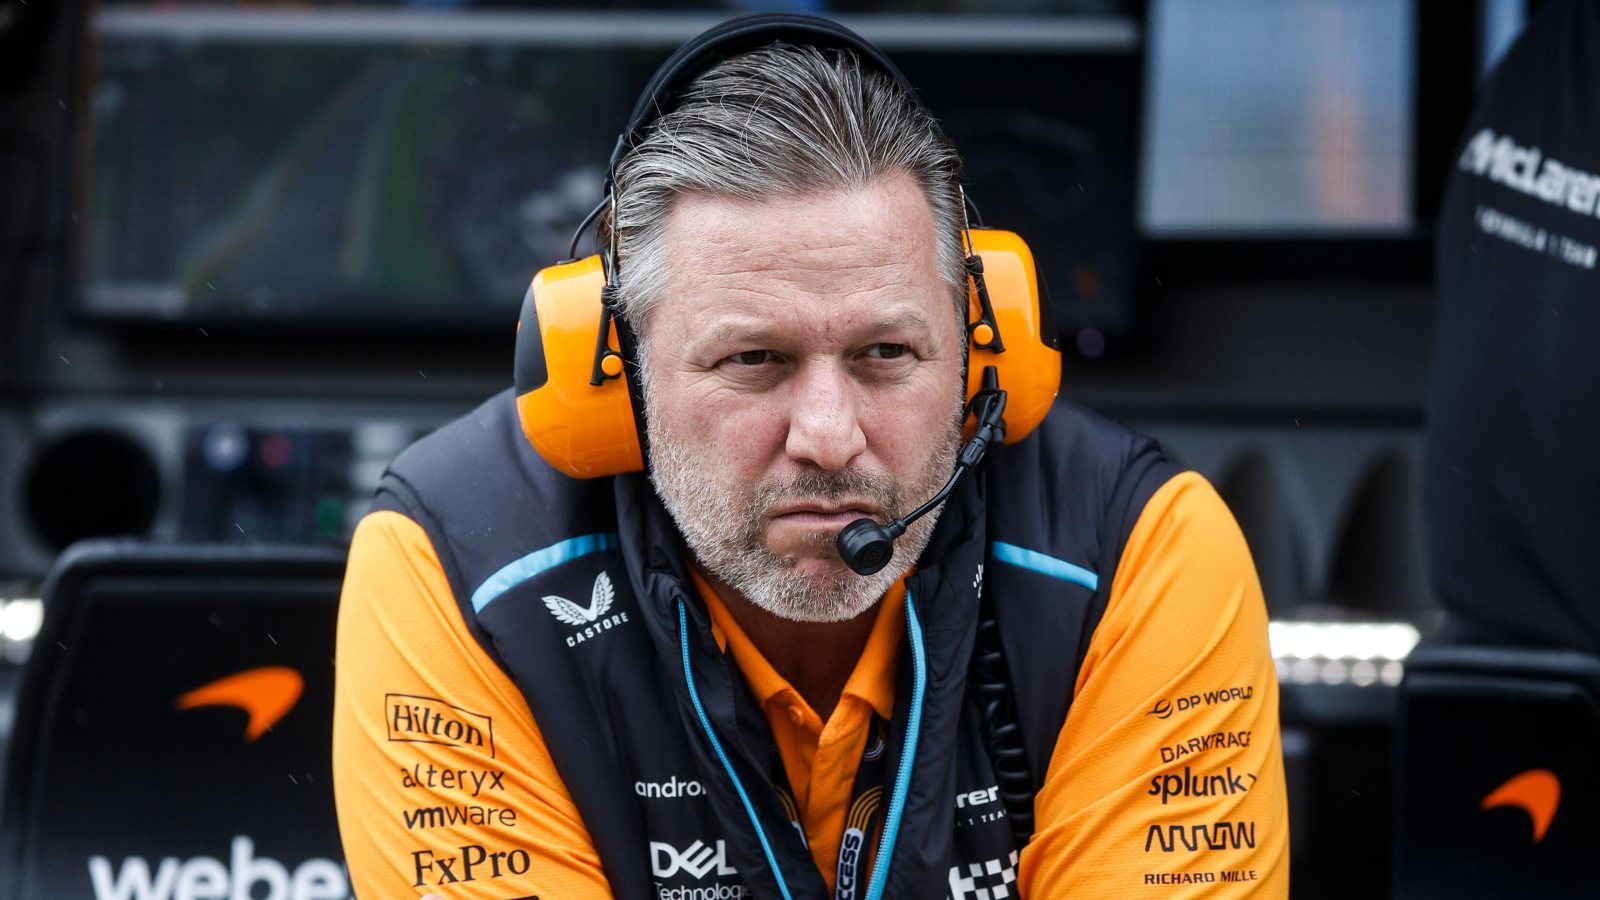 Zak Brown on the pit wall. Australia, Melbourne. March 2023